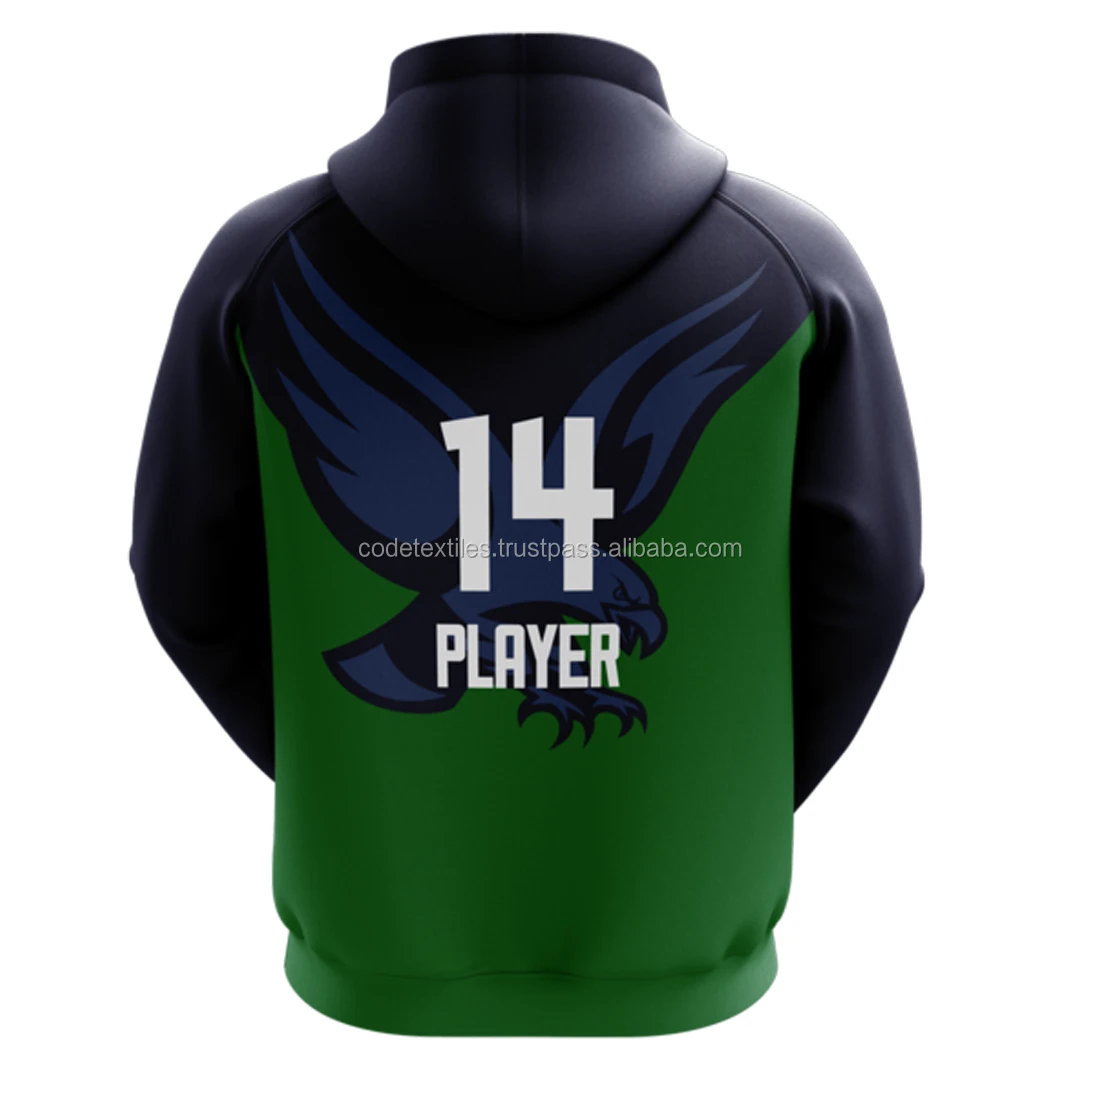  Custom Hoodies Baseball City Gifts for Men and Youth Hooded  Sweatshirt Fans Customize Your Name and Number : Sports & Outdoors